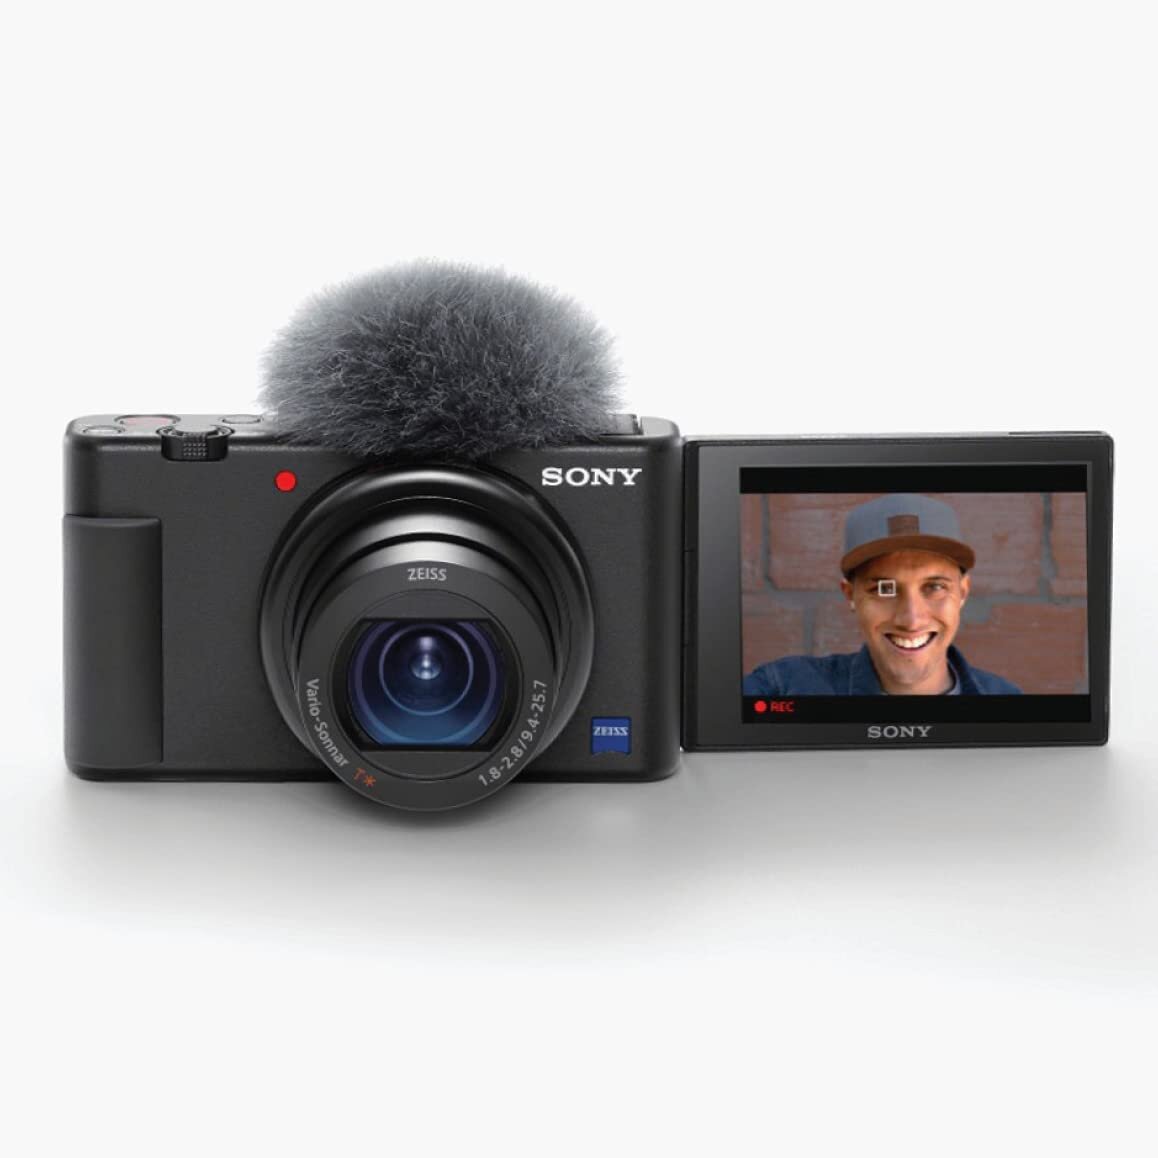 Sony ZV-1 Digital Camera for Content Creators, Vlogging and YouTube with Flip Screen, Built-in Microphone, 4K